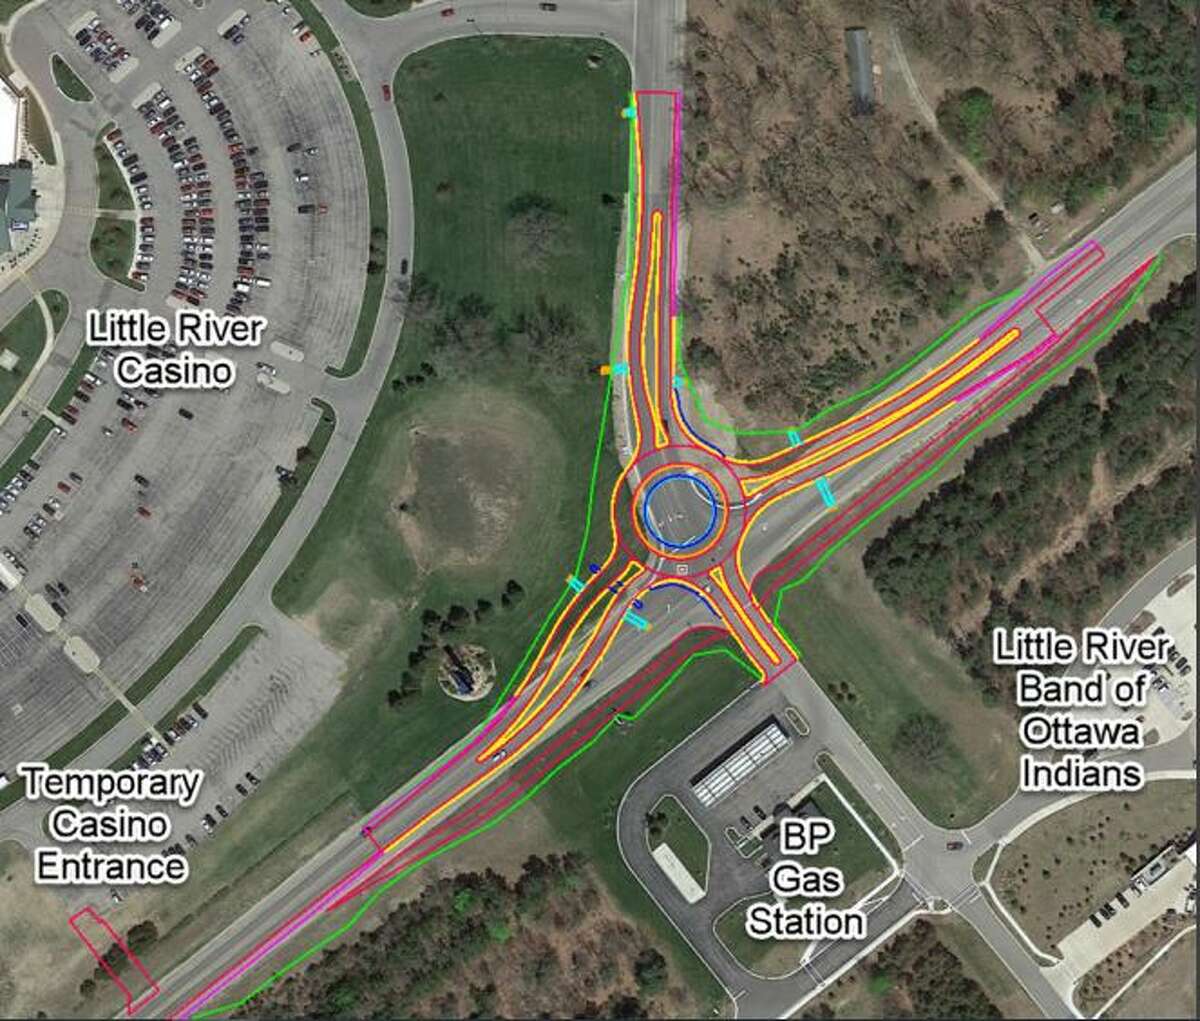 This shows how traffic will flow after a proposed roundabout is constructed at the intersection of M-22 and U.S. 31 in Manistee Township in 2022.